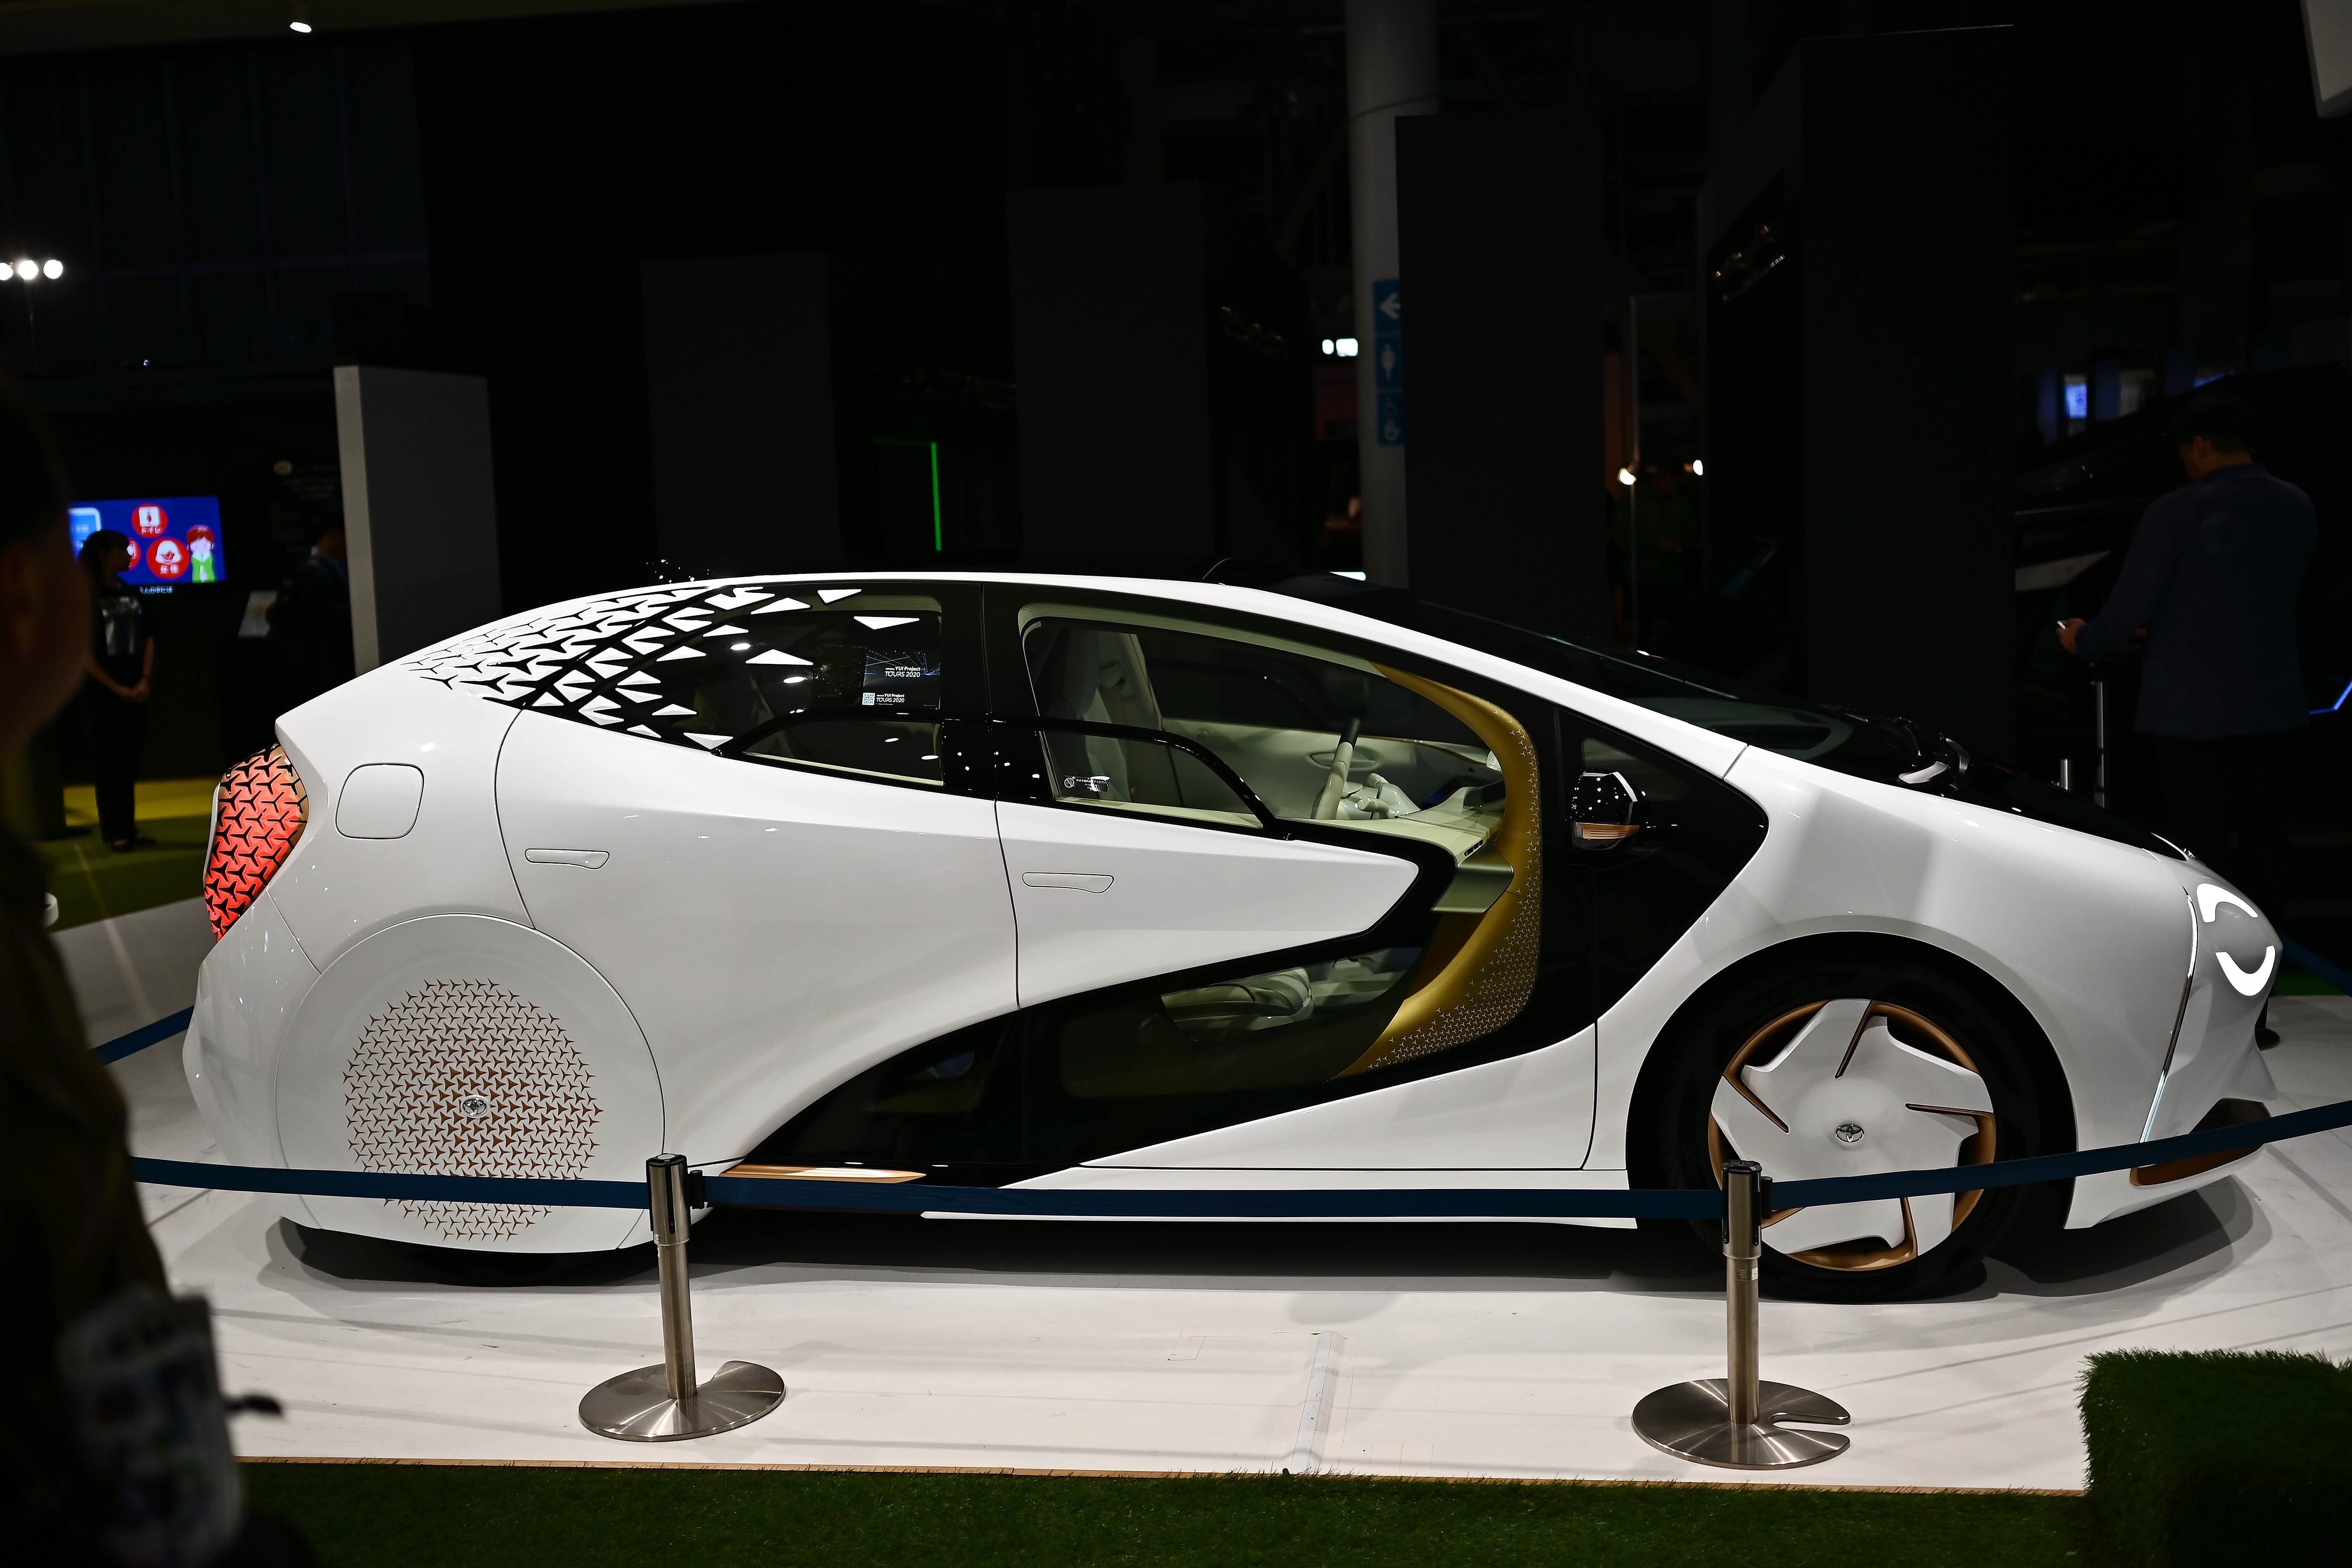 The Toyota LQ concept car is pictured at the Tokyo Motor Show